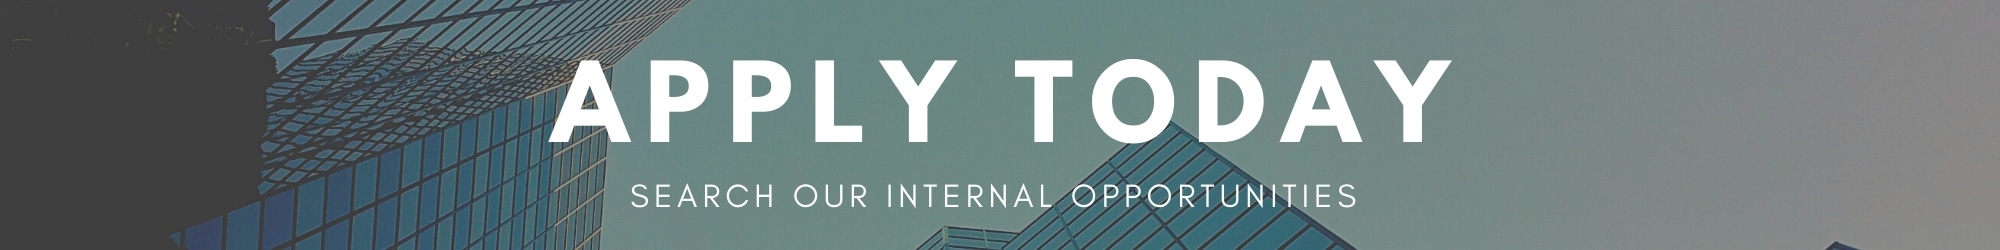 Apply today- search Scion internal opportunities, Tall office buildings in the background